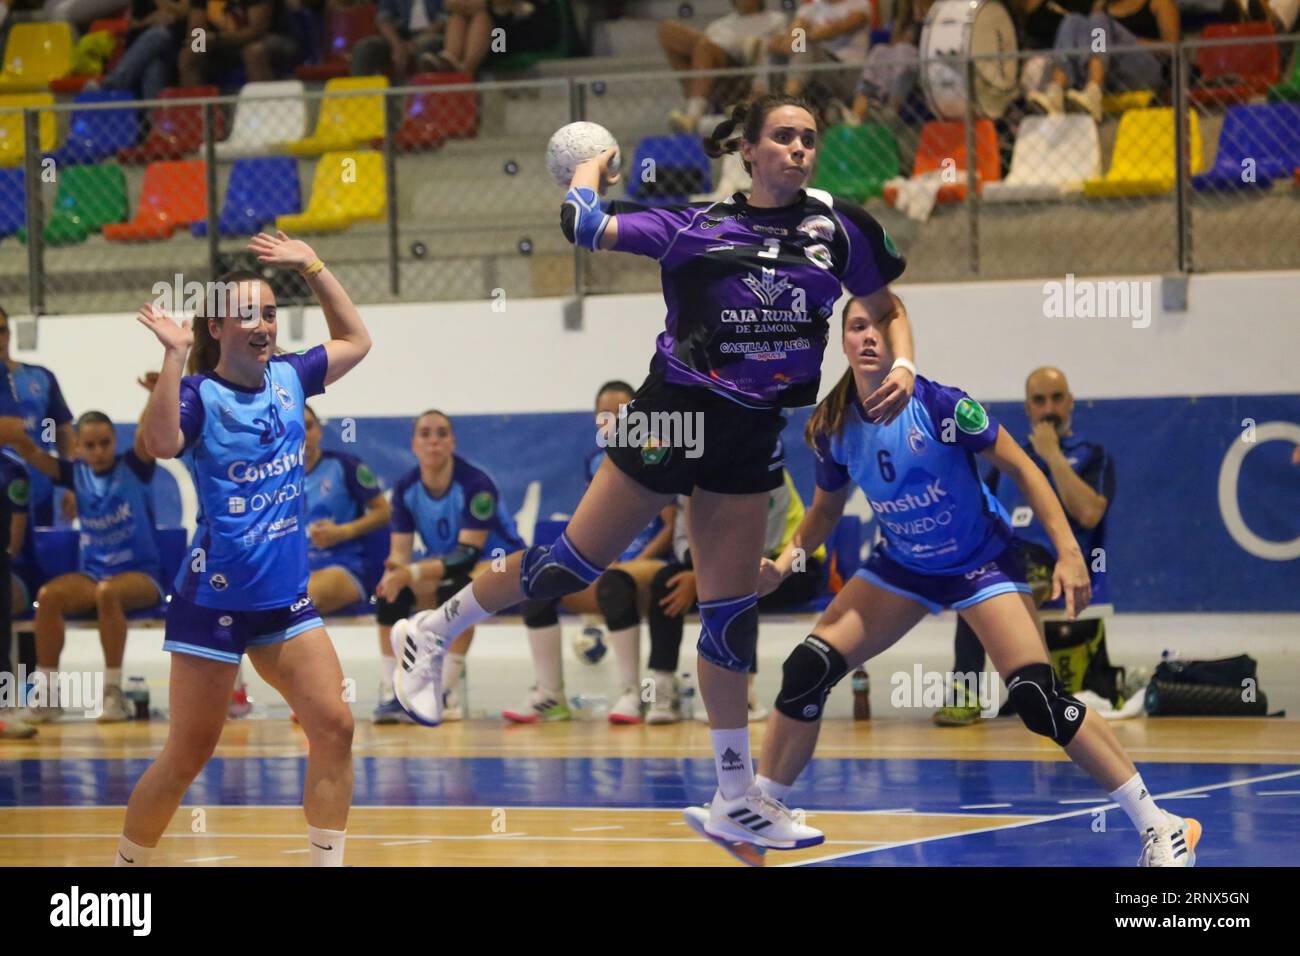 Oviedo, Spain, 02nd September, 2023: Caja Rural Aula Valladolid player, Jimena Laguna (3) shoots on goal during the first day of the Liga Guerreras Iberdrola between Lobas Global Atac Oviedo and Caja Rural Aula Valladolid, on 02 September 2023, at the Florida Arena Municipal Sports Center, in Oviedo, Spain. Credit: Alberto Brevers / Alamy Live News. Stock Photo